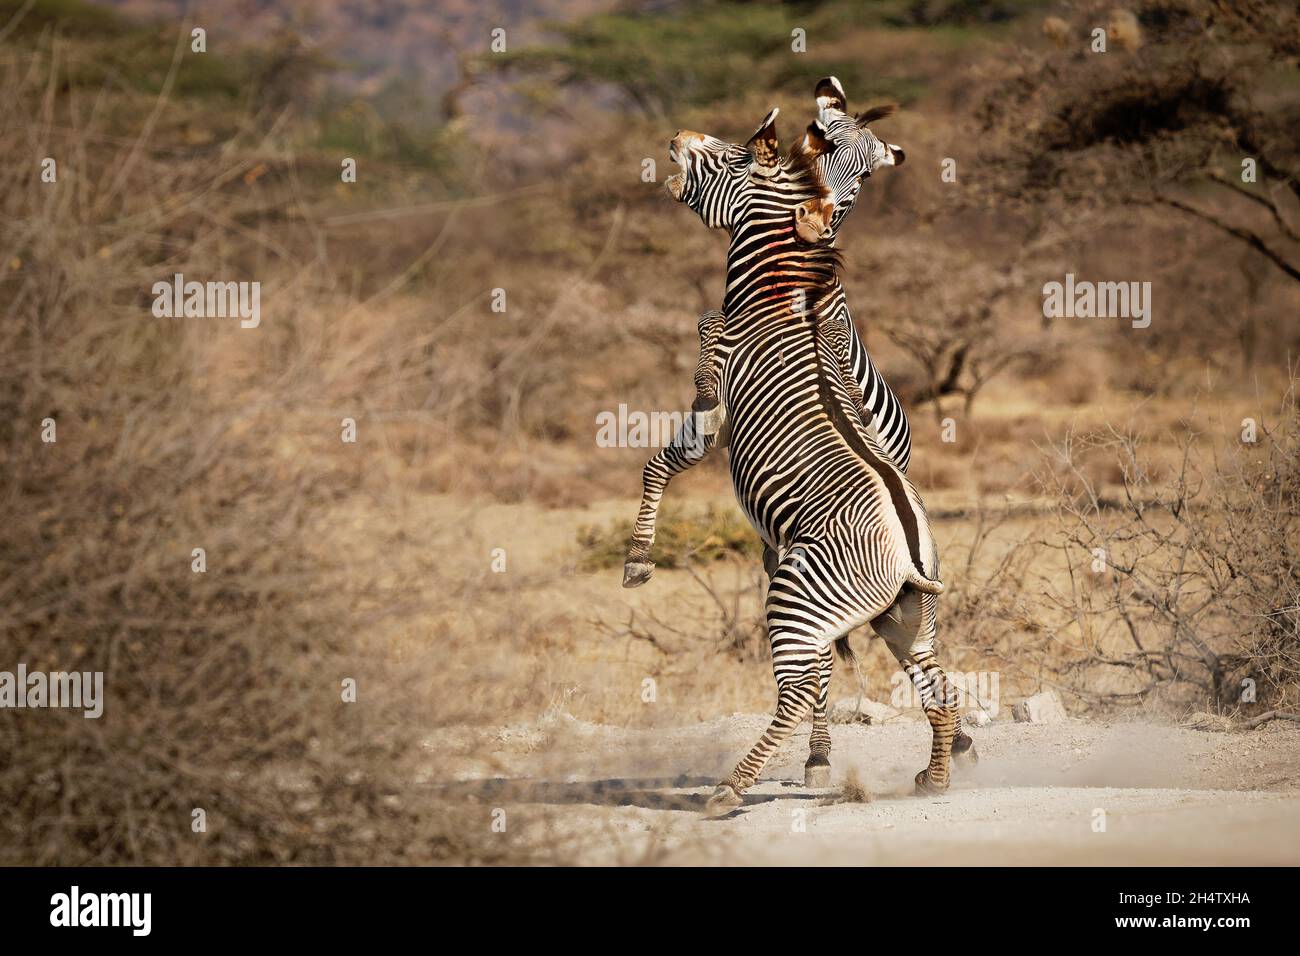 Grevys Zebra - Equus grevyi also Imperial zebra, bloody fighting duel, largest living wild equid, most threatened of the three species, found in Kenya Stock Photo